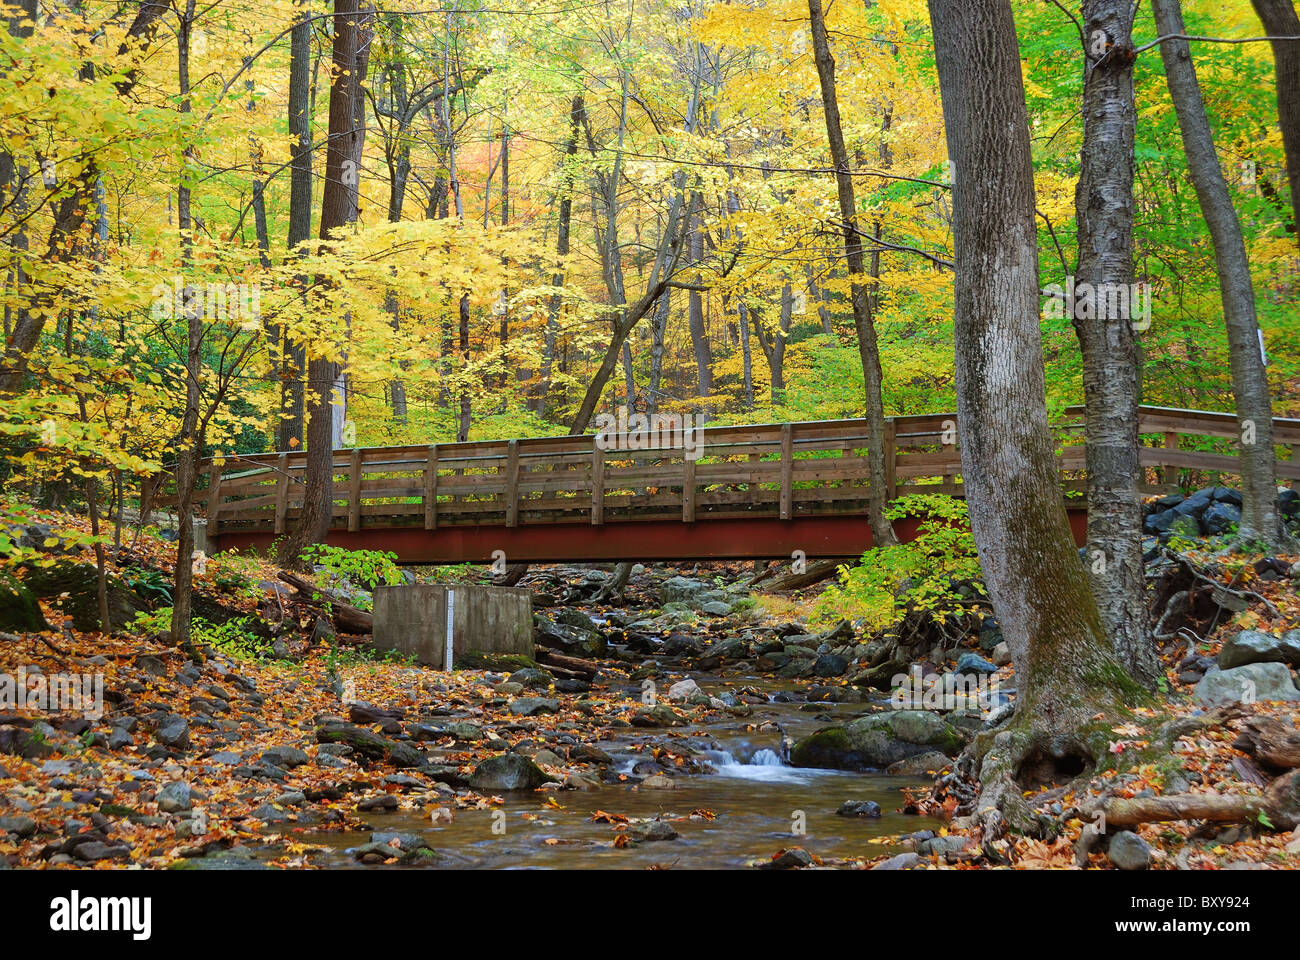 Autumn forest with wood bridge over creek in yellow maple forest with trees and colorful foliage. Stock Photo